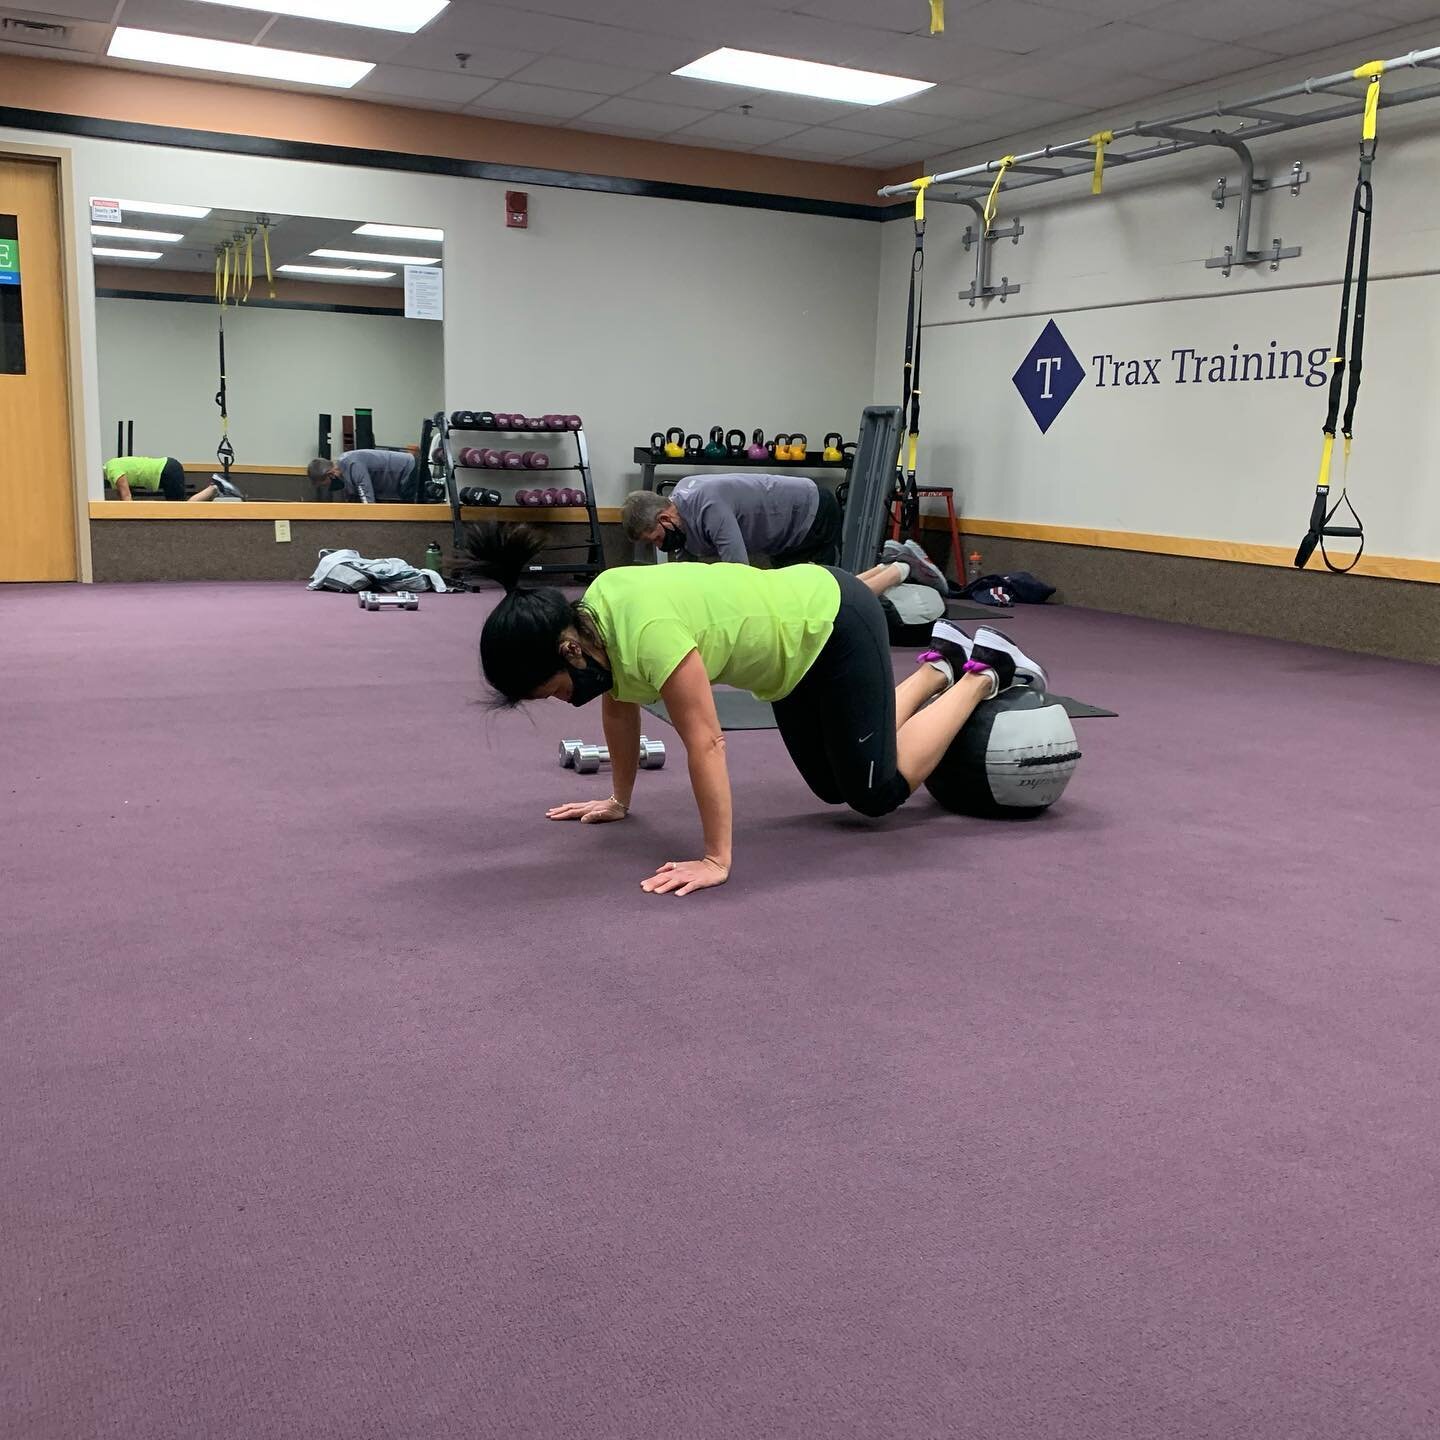 Want to try these med ball climbers? These really are a good burn! Try TRIBE CORE and all of our TRIBE programs this week for FREE! Contact Danielle at dspiro@healthtrax.net for more info or to sign up! #tribecore #tribefit #tribelife #tribeteamtrain